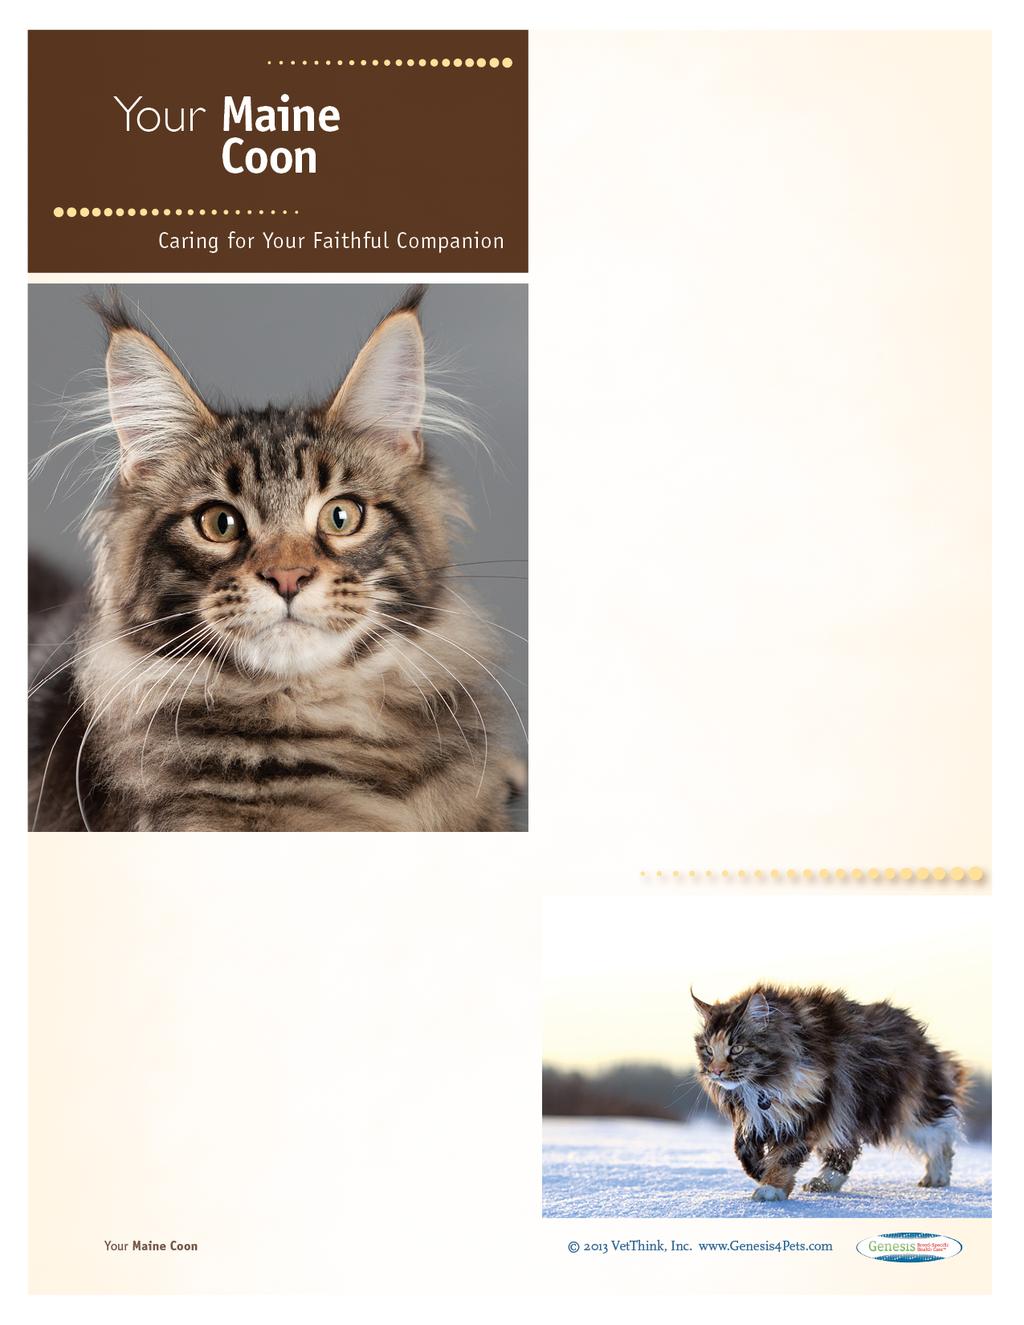 Maine Coons: What a Unique Breed! Your cat is special! She senses your moods, is curious about your day, and has purred her way into your heart.